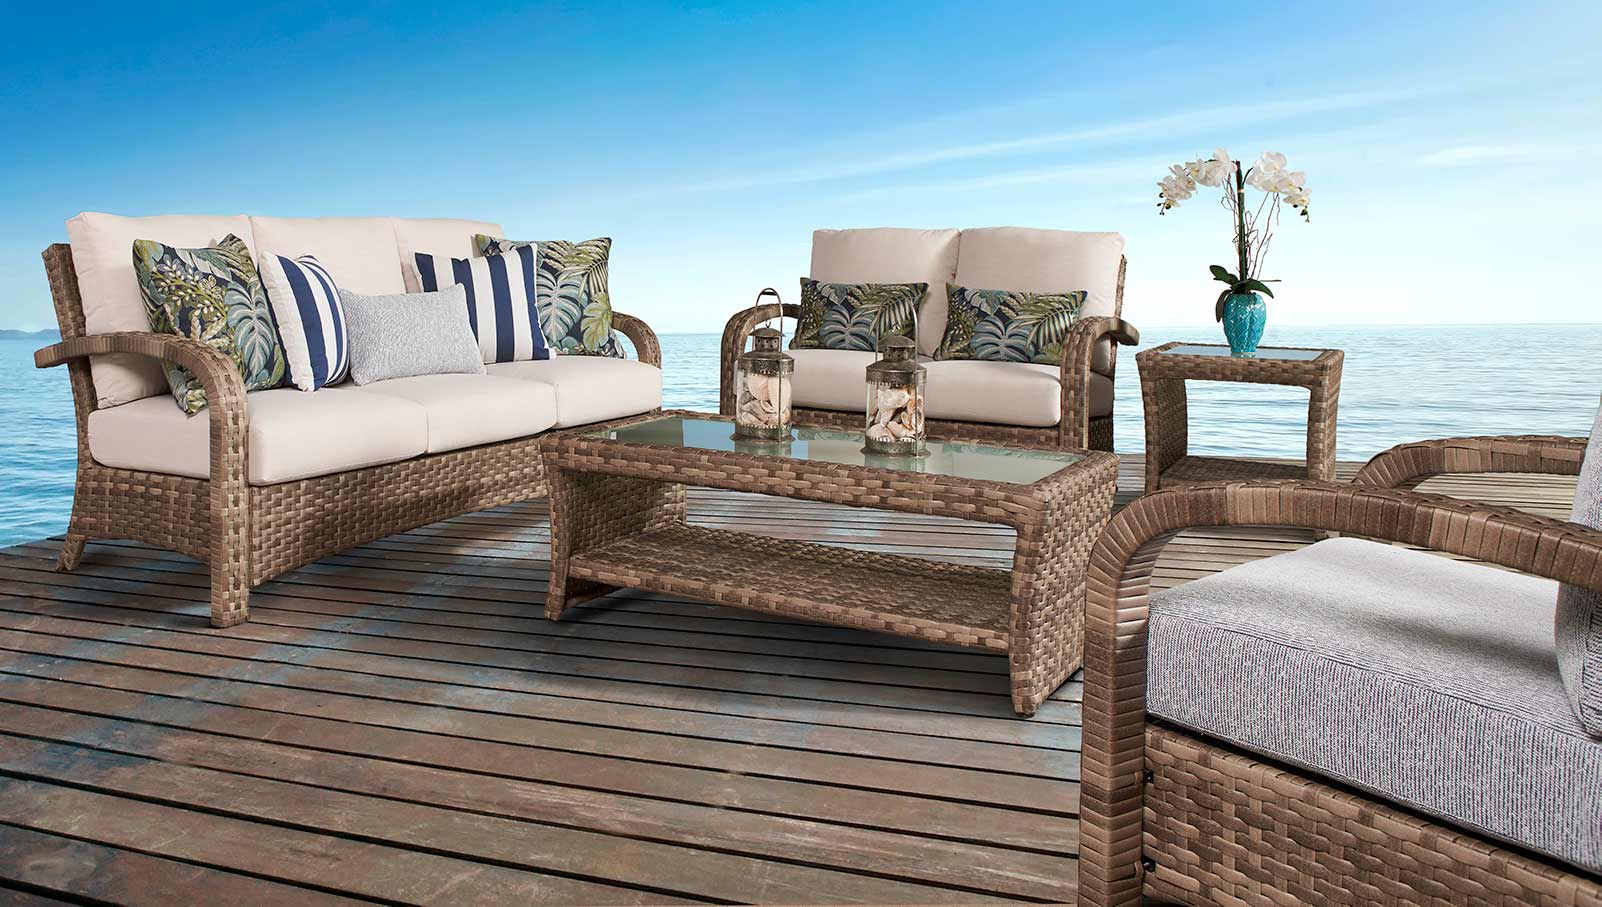 All-Weather Wicker Patio Furniture